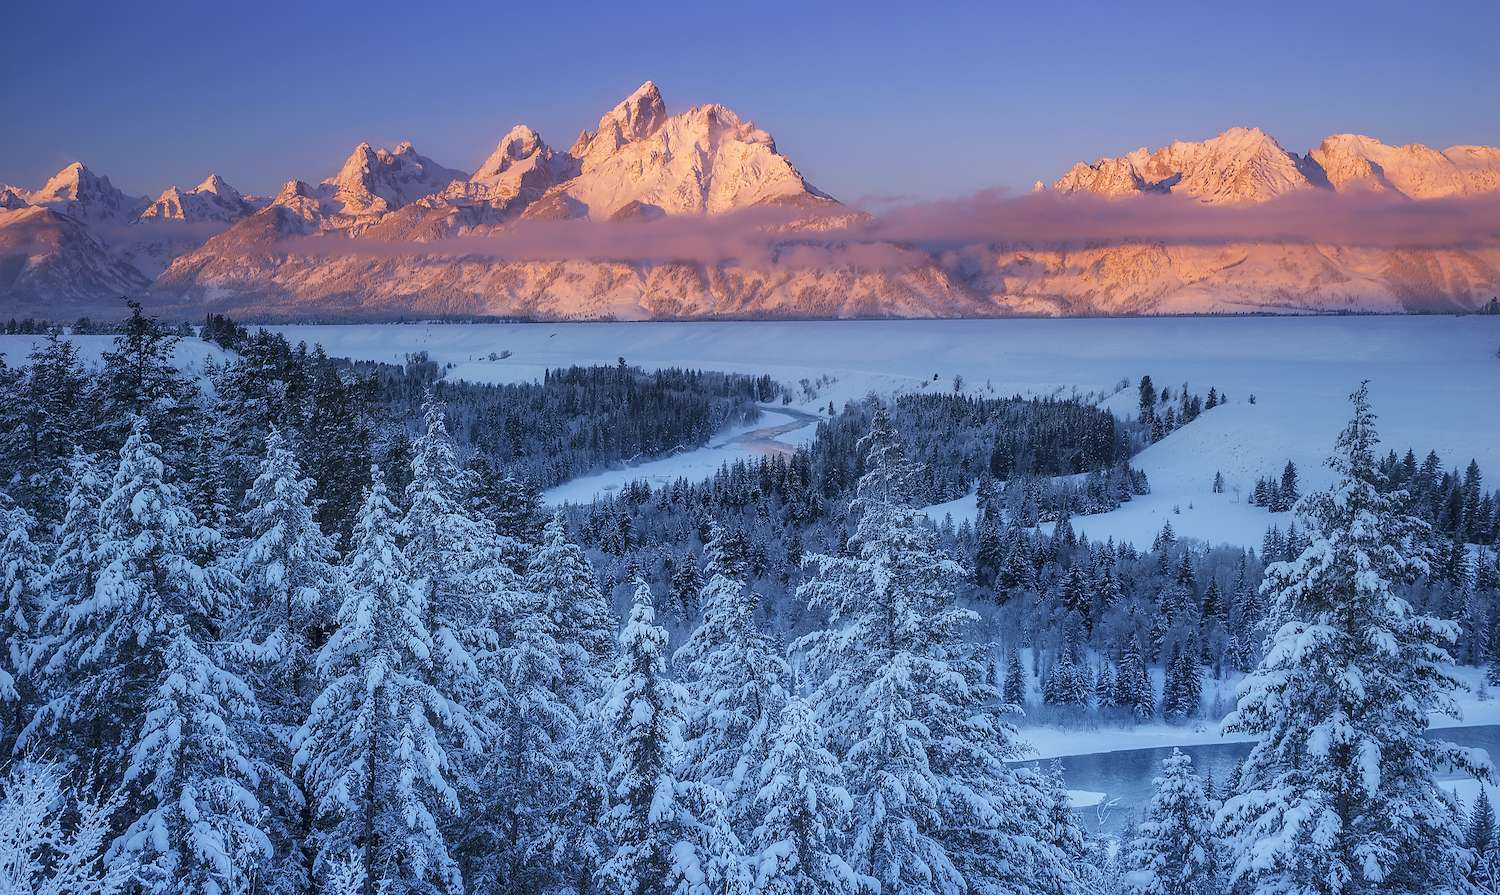 The winter sun rises over the Snake River Overlook in Grand Teton National Park, Wyoming.